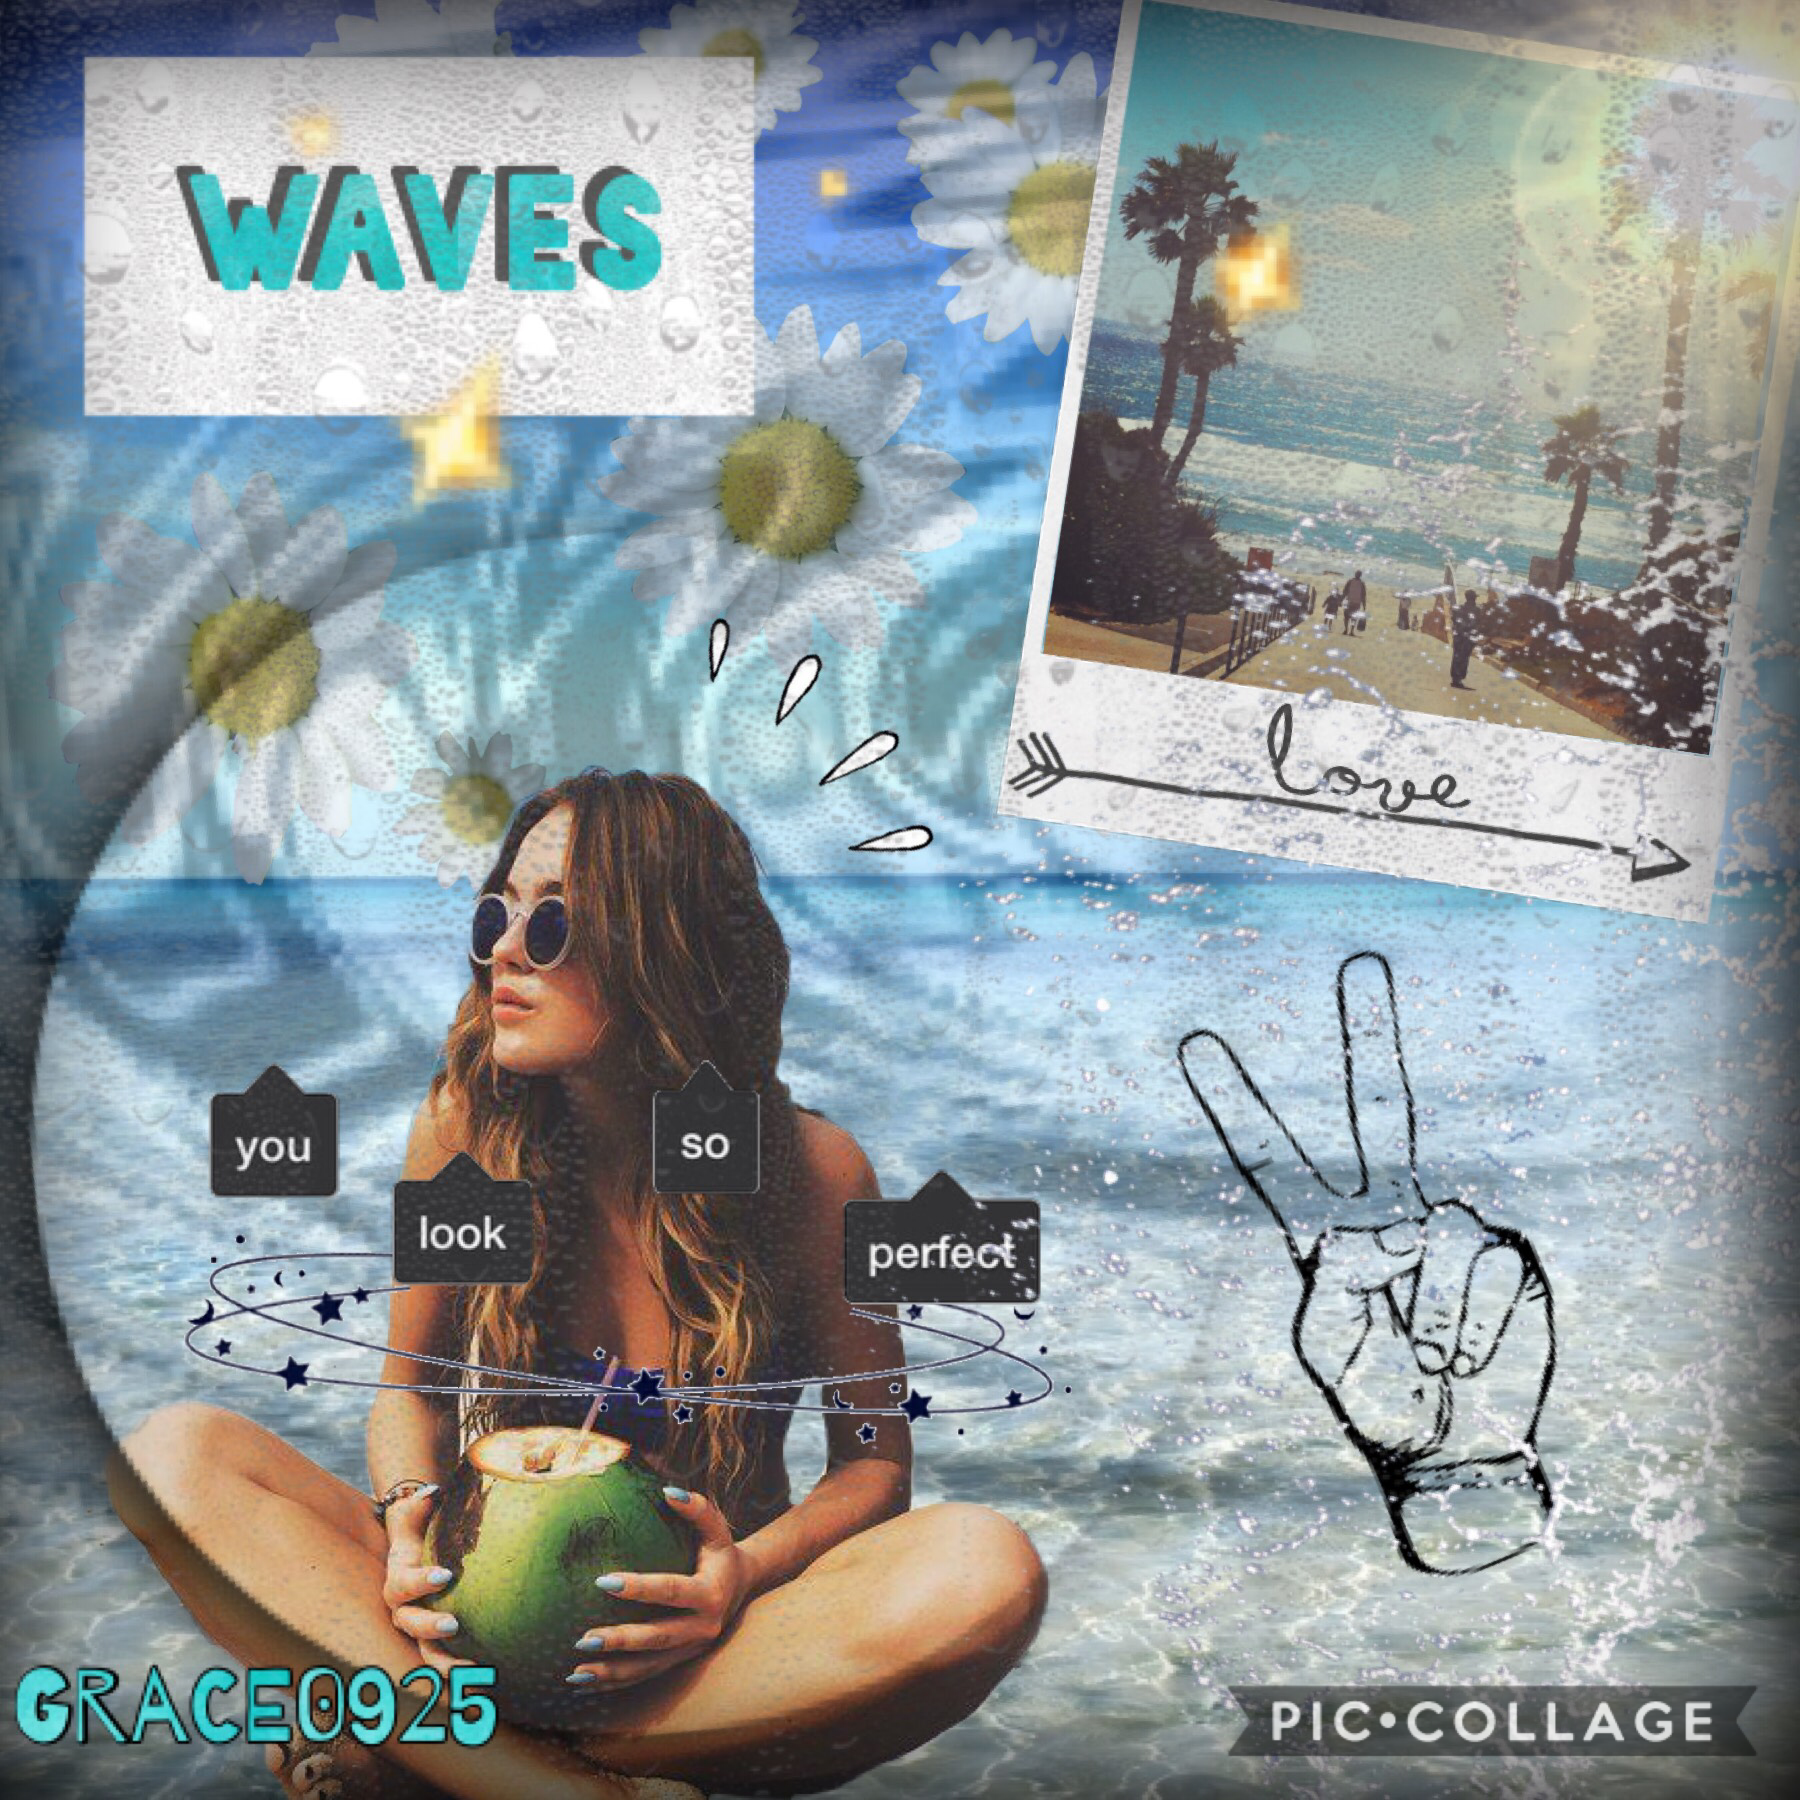 🌸🏝🌼💧tap💧🌼🏝🌸

Heyyyyy 
Just ur classic beach pic... 
I’m trying something new
-Grace0925🌻🥀
